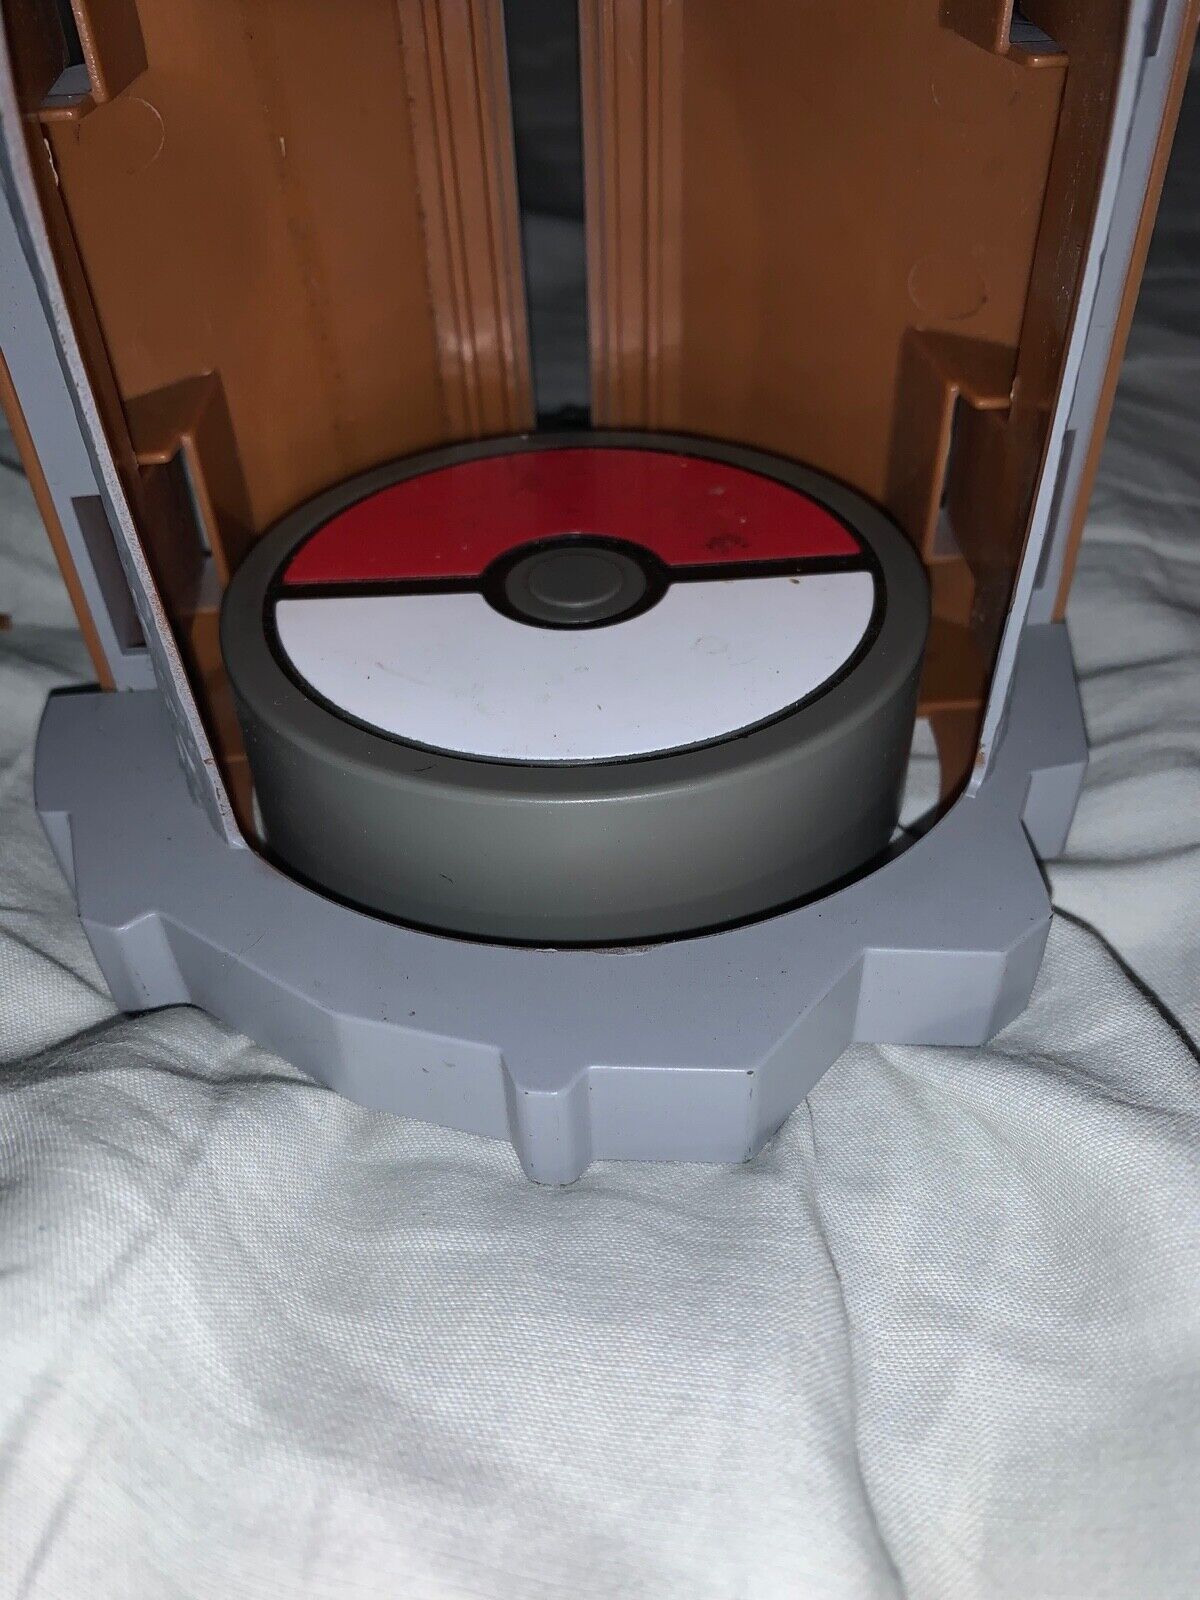 Primary image for 2007 Jakks Pacific Pokemon Diamond Pearl Battle Elevator Tower Replacement Part